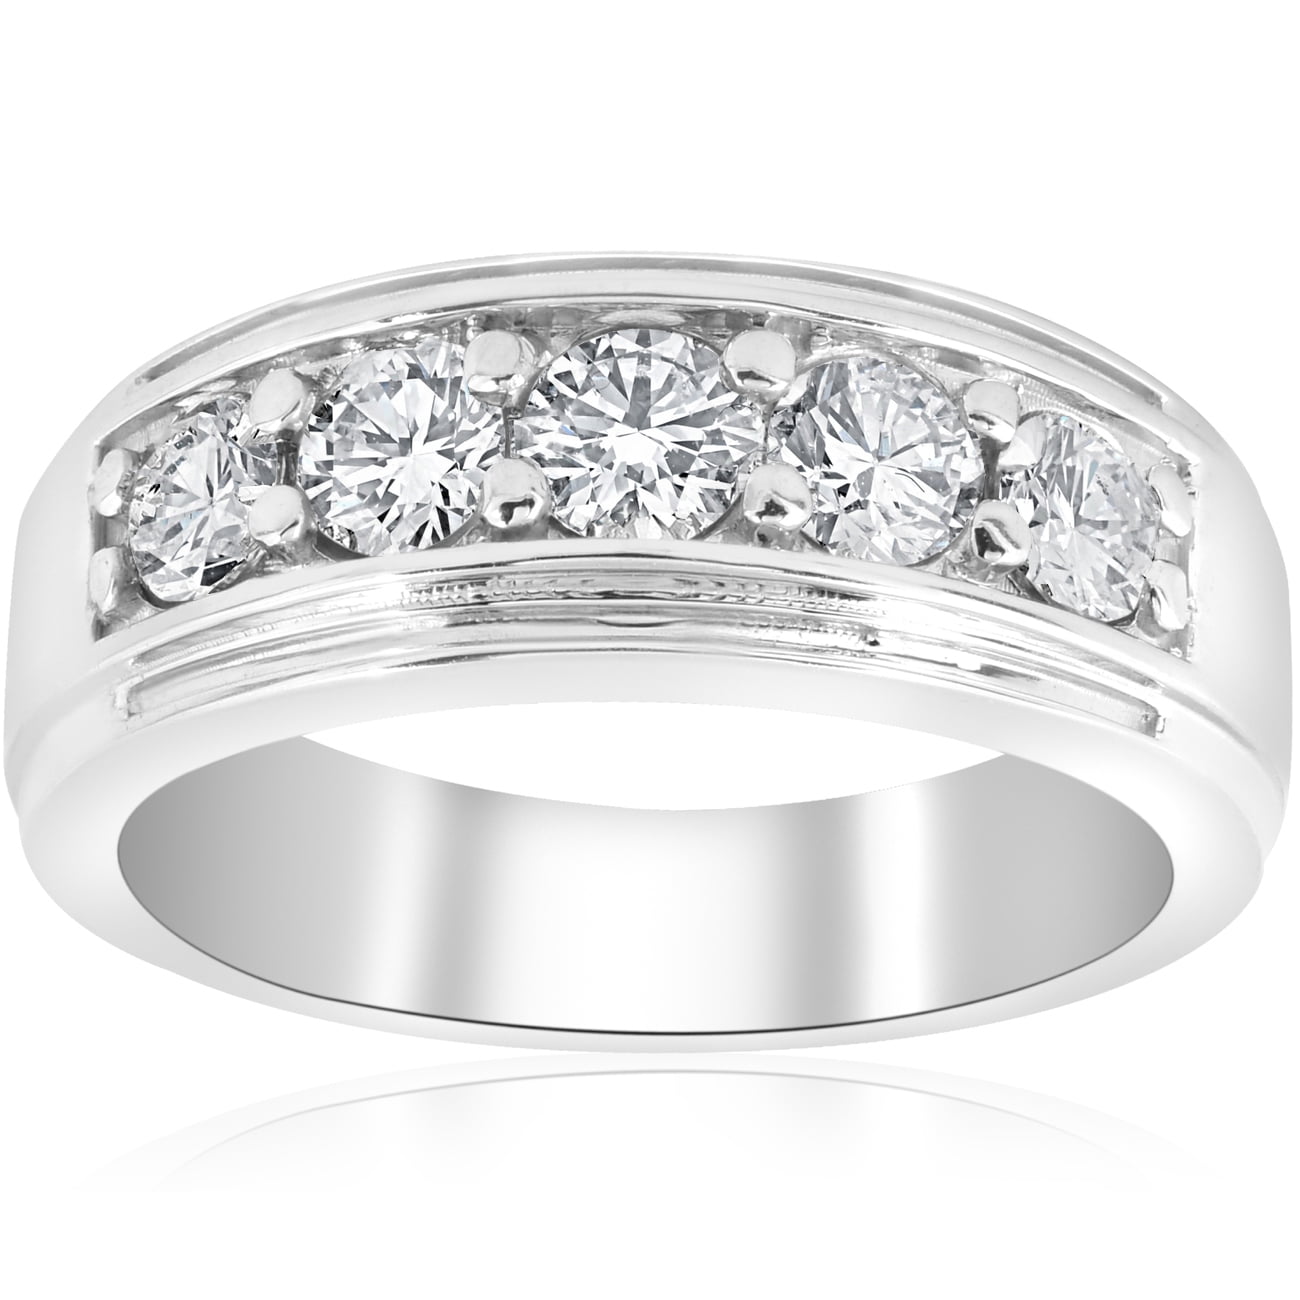 1 CT 14k Solid White Gold Diamond Wedding Band Ring Round Cut Channel Set